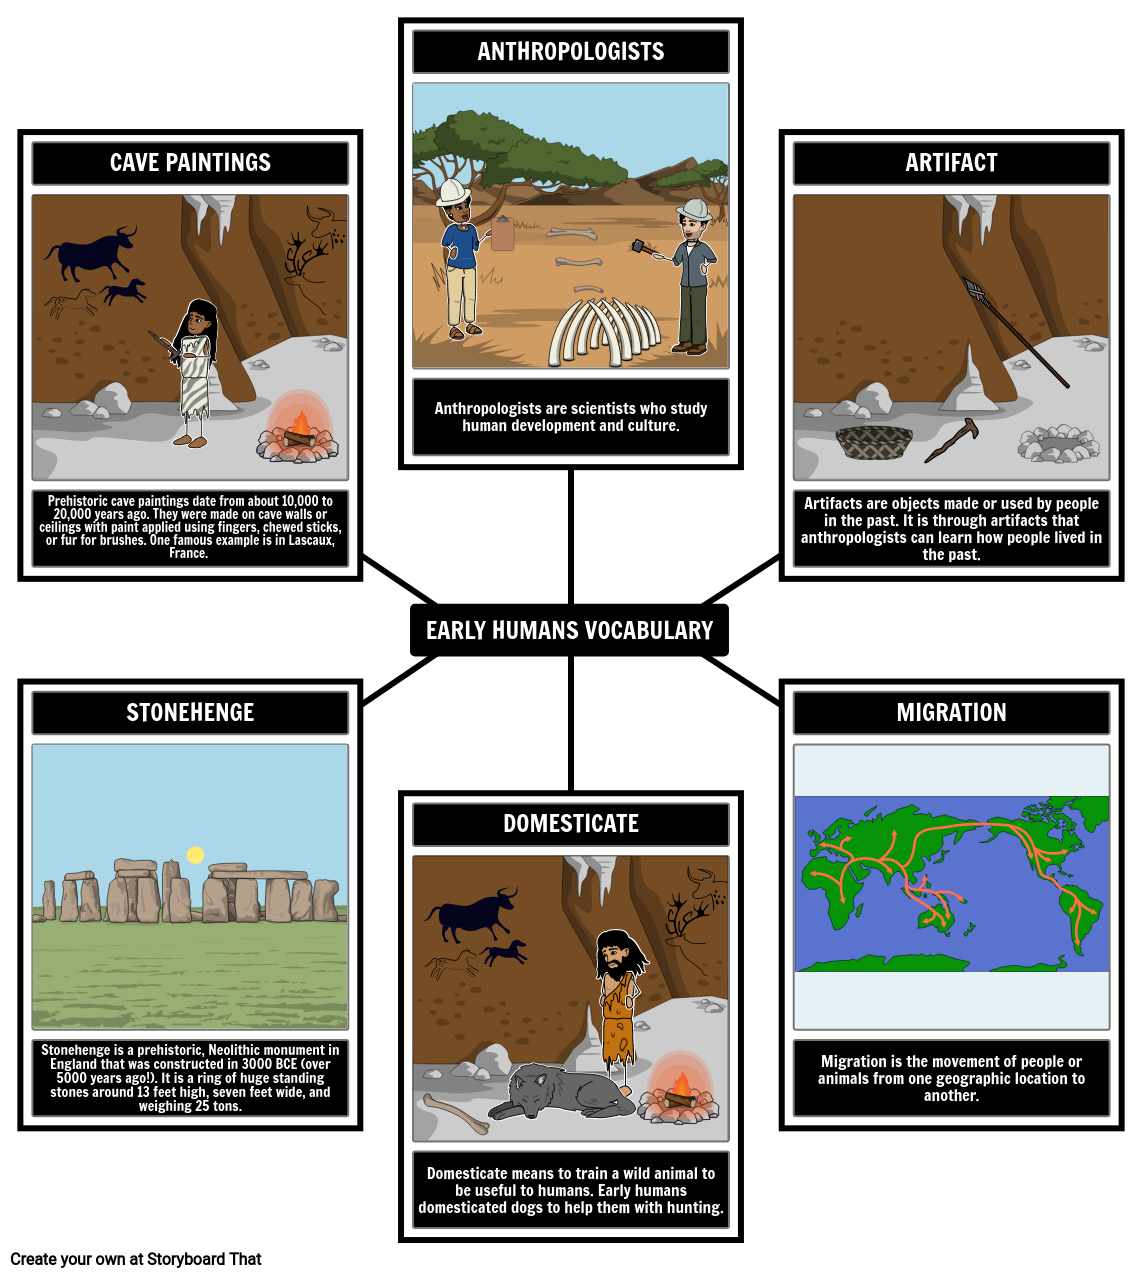 Early Humans Vocabulary